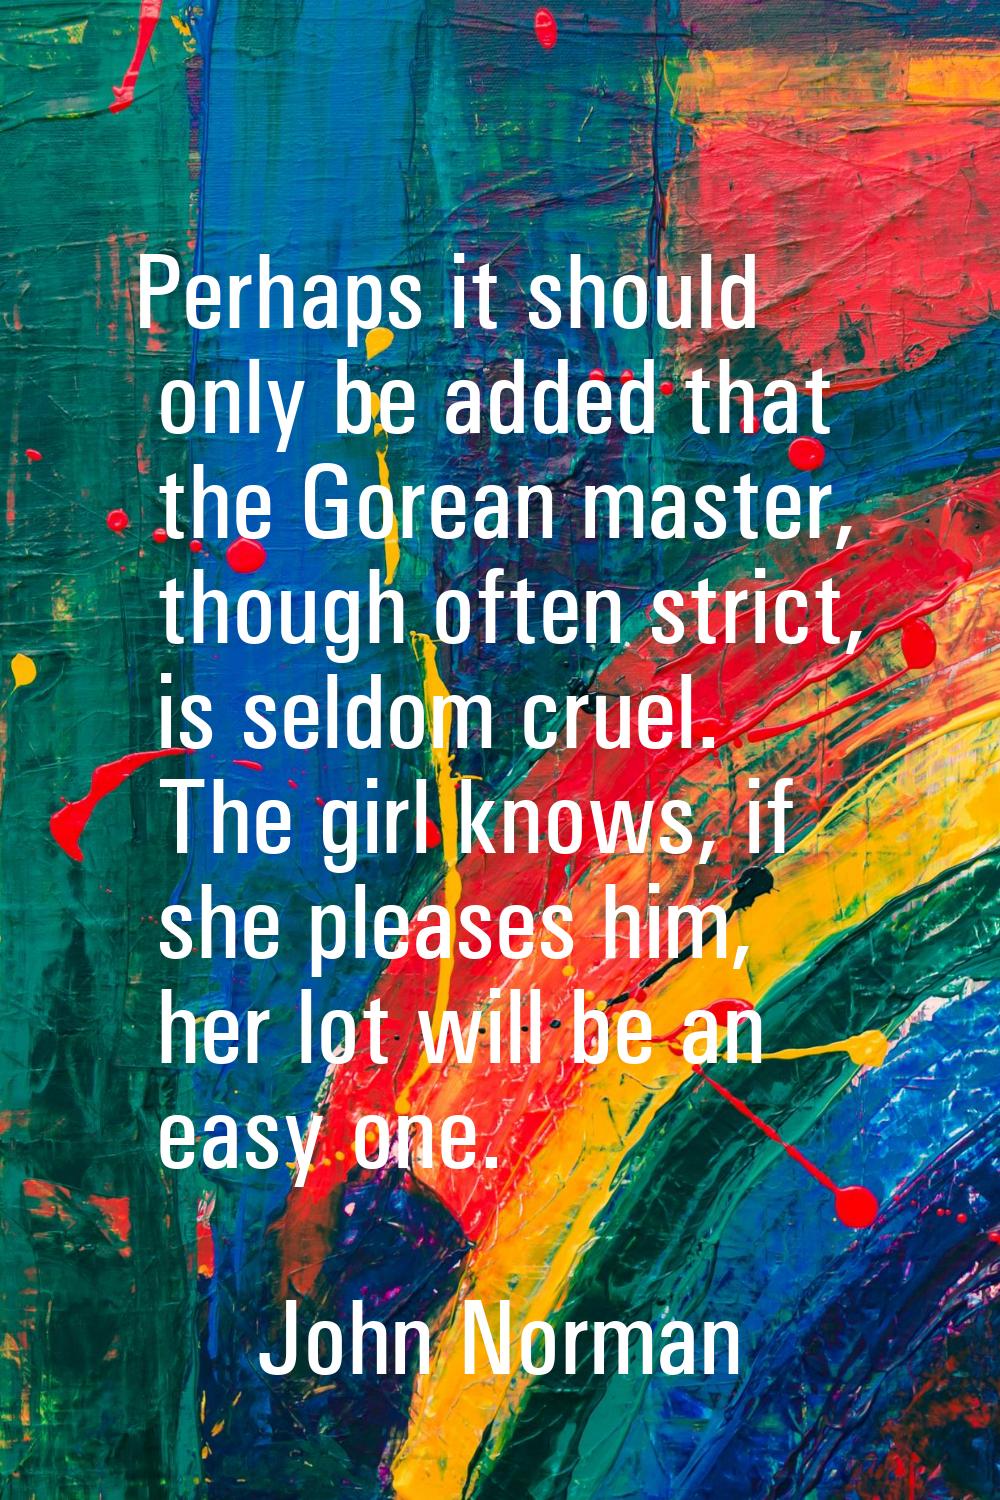 Perhaps it should only be added that the Gorean master, though often strict, is seldom cruel. The g